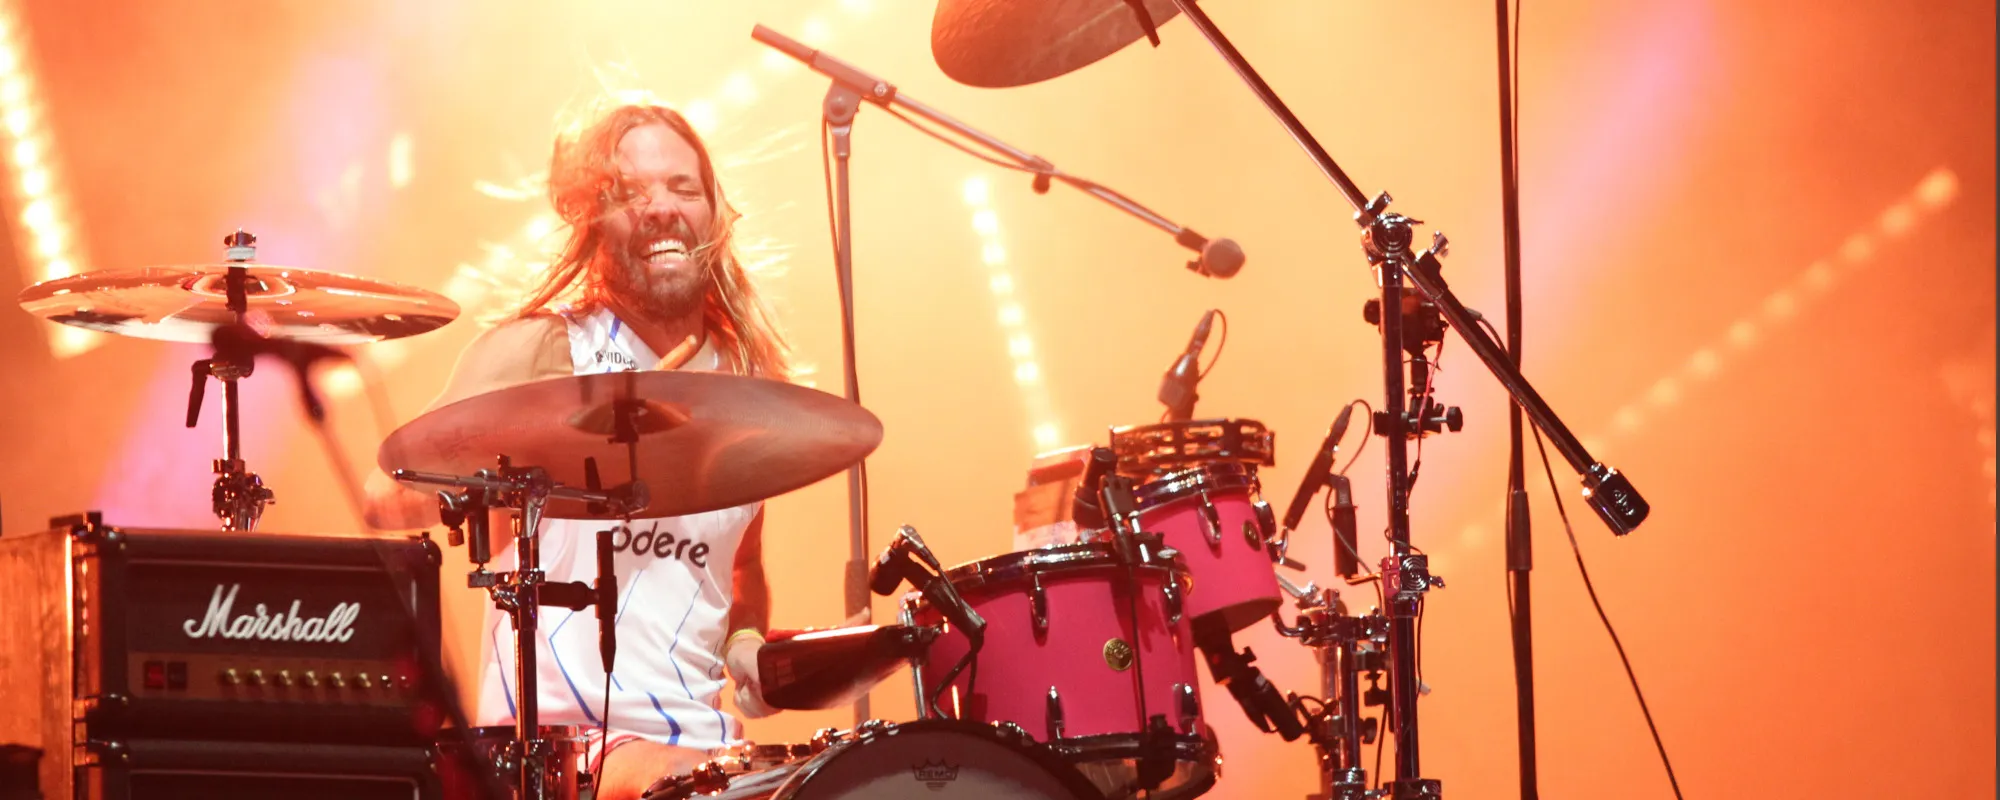 Highlights from the Taylor Hawkins Tribute Concert